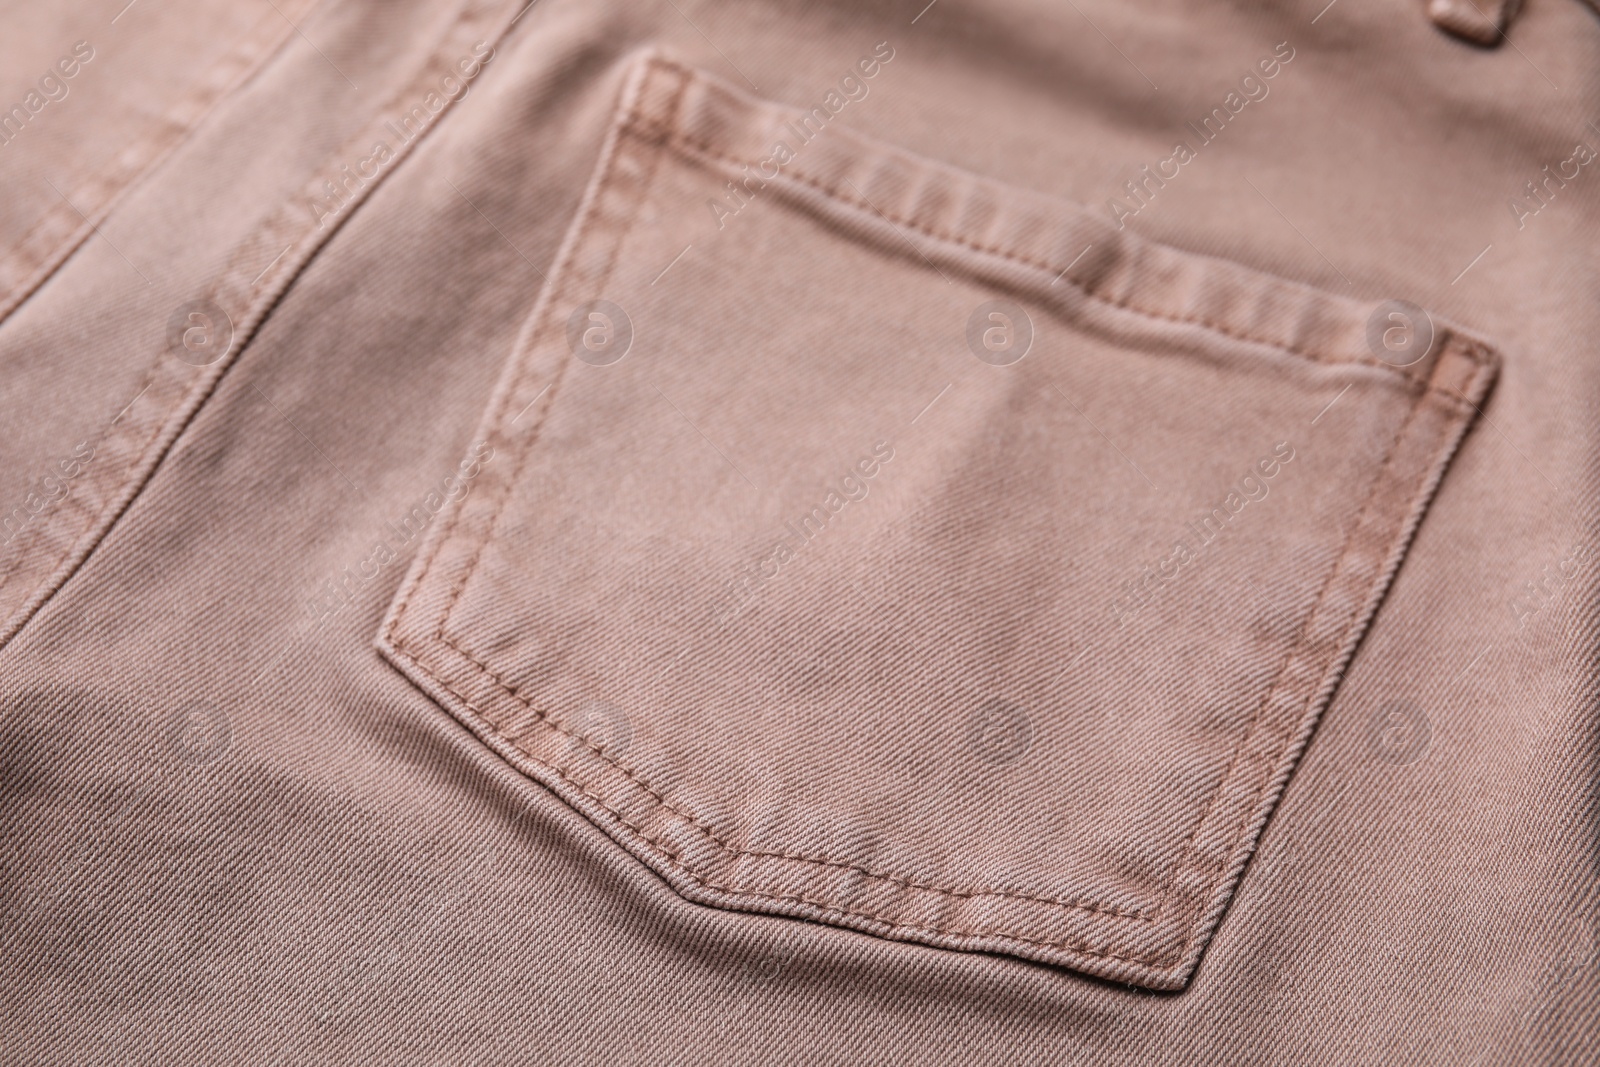 Photo of Beige jeans with pockets as background, closeup